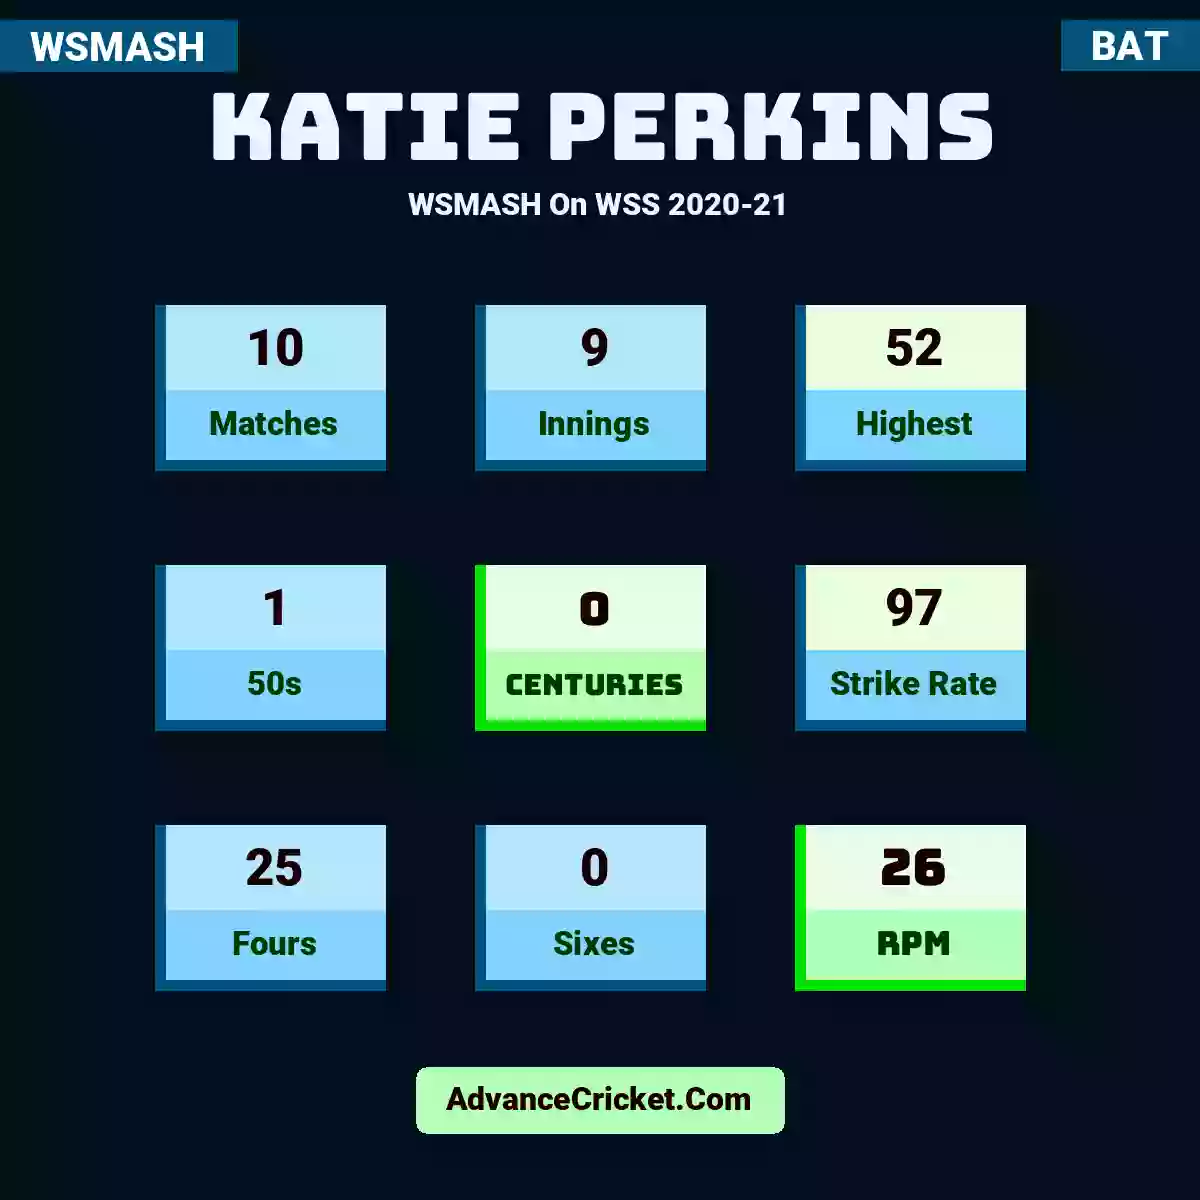 Katie Perkins WSMASH  On WSS 2020-21, Katie Perkins played 10 matches, scored 52 runs as highest, 1 half-centuries, and 0 centuries, with a strike rate of 97. K.Perkins hit 25 fours and 0 sixes, with an RPM of 26.